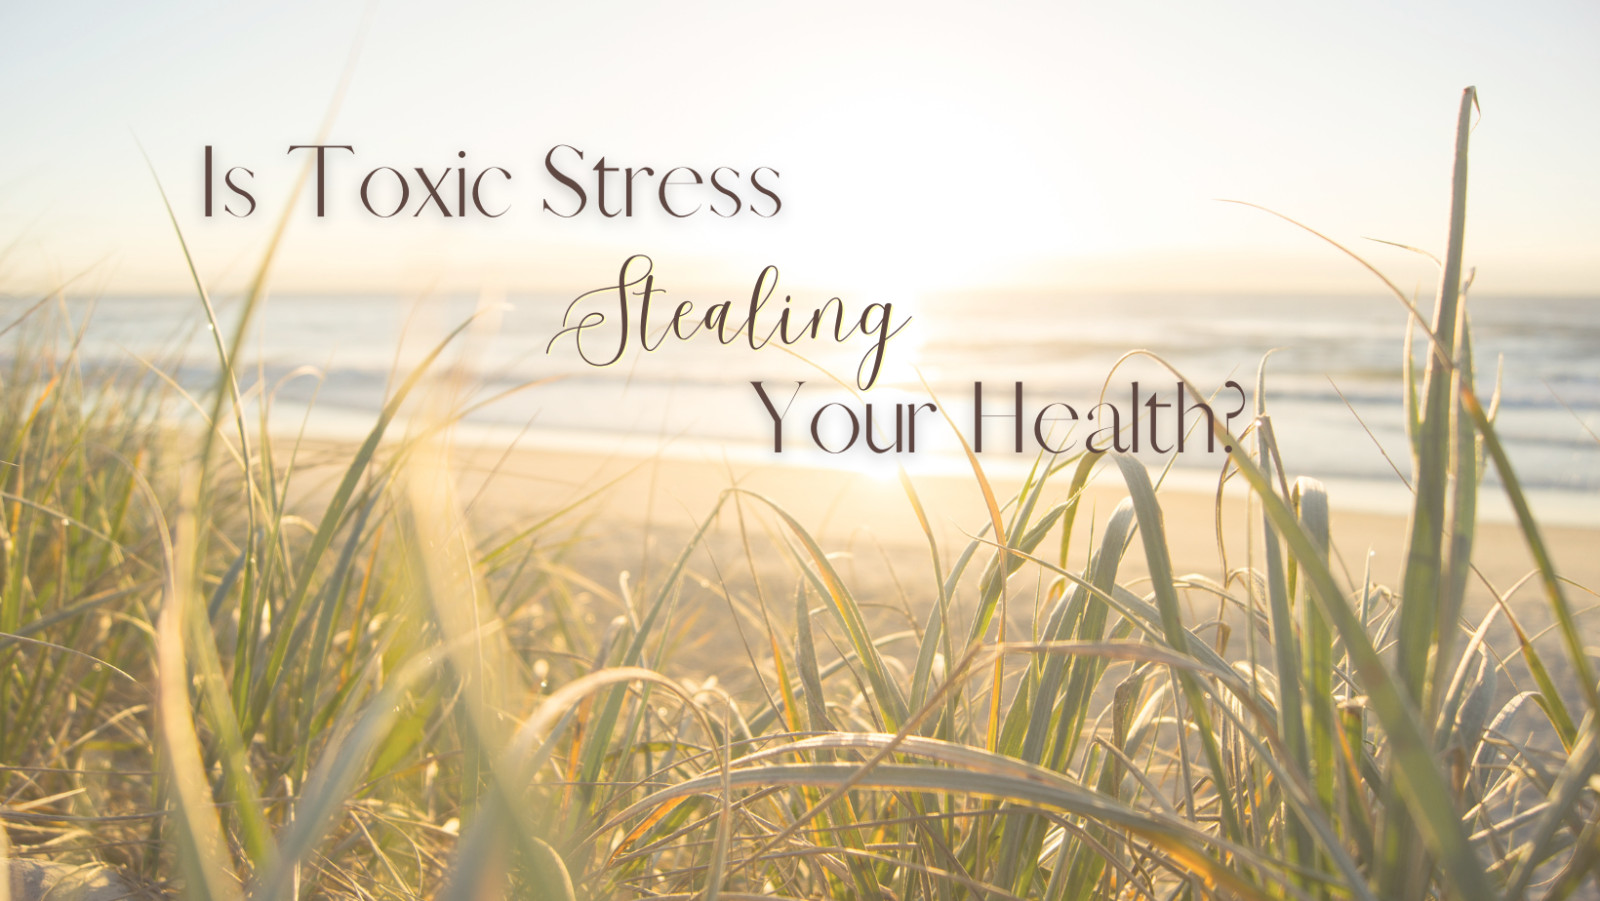 Is Toxic Stress Stealing Your Health?